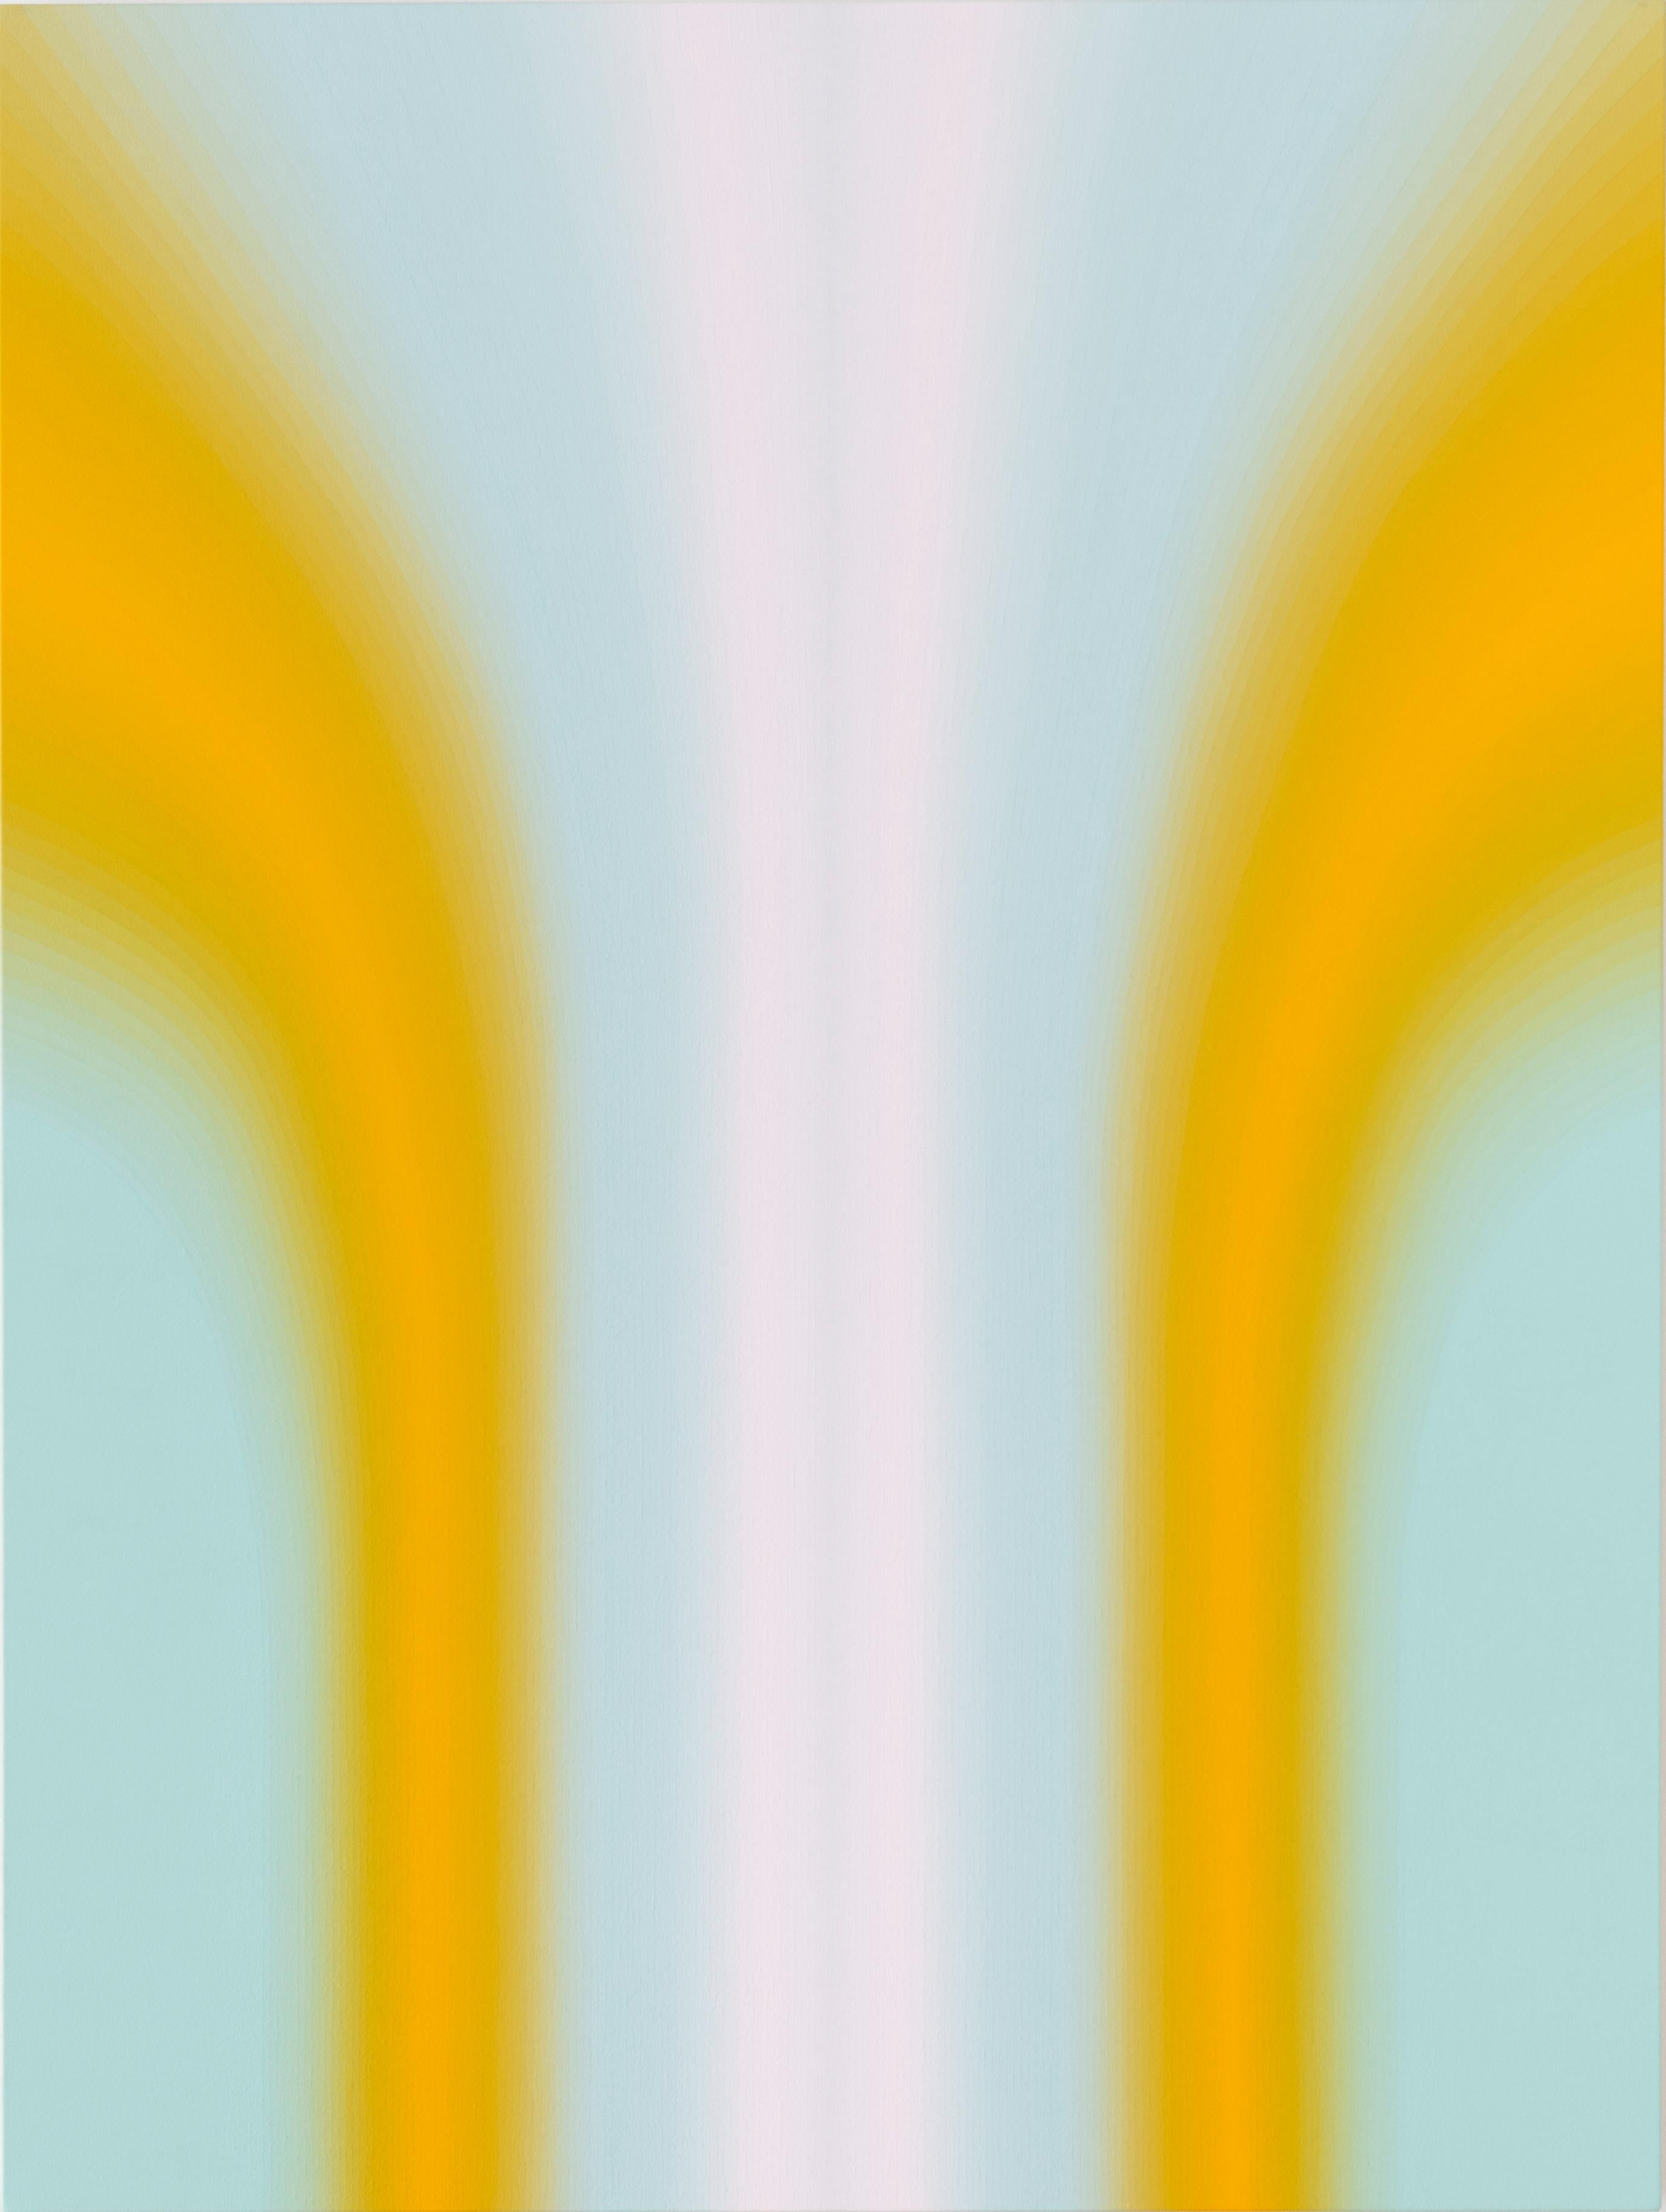 Audrey Stone Abstract Painting - Shadow Valley Six, Light Yellow Orange, Mint Blue, White Gradient Curving Shape